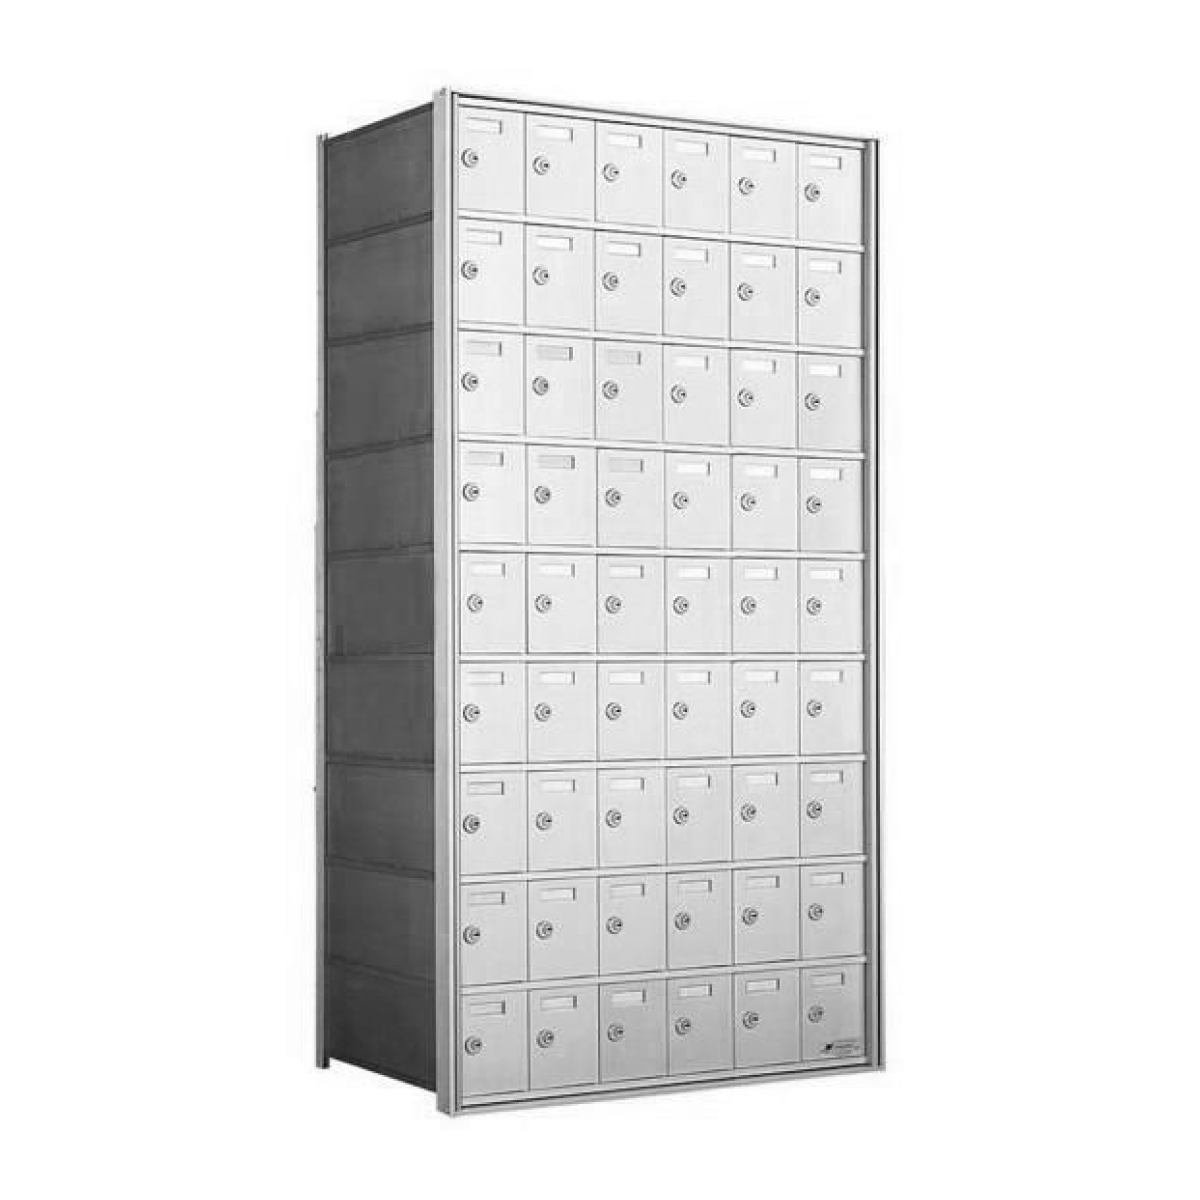 9 Doors High x 6 Doors (54 Tenants) 1700 Horizontal Mailbox Rear-Load Private Distribution in Anodized Aluminum Finish Product Image